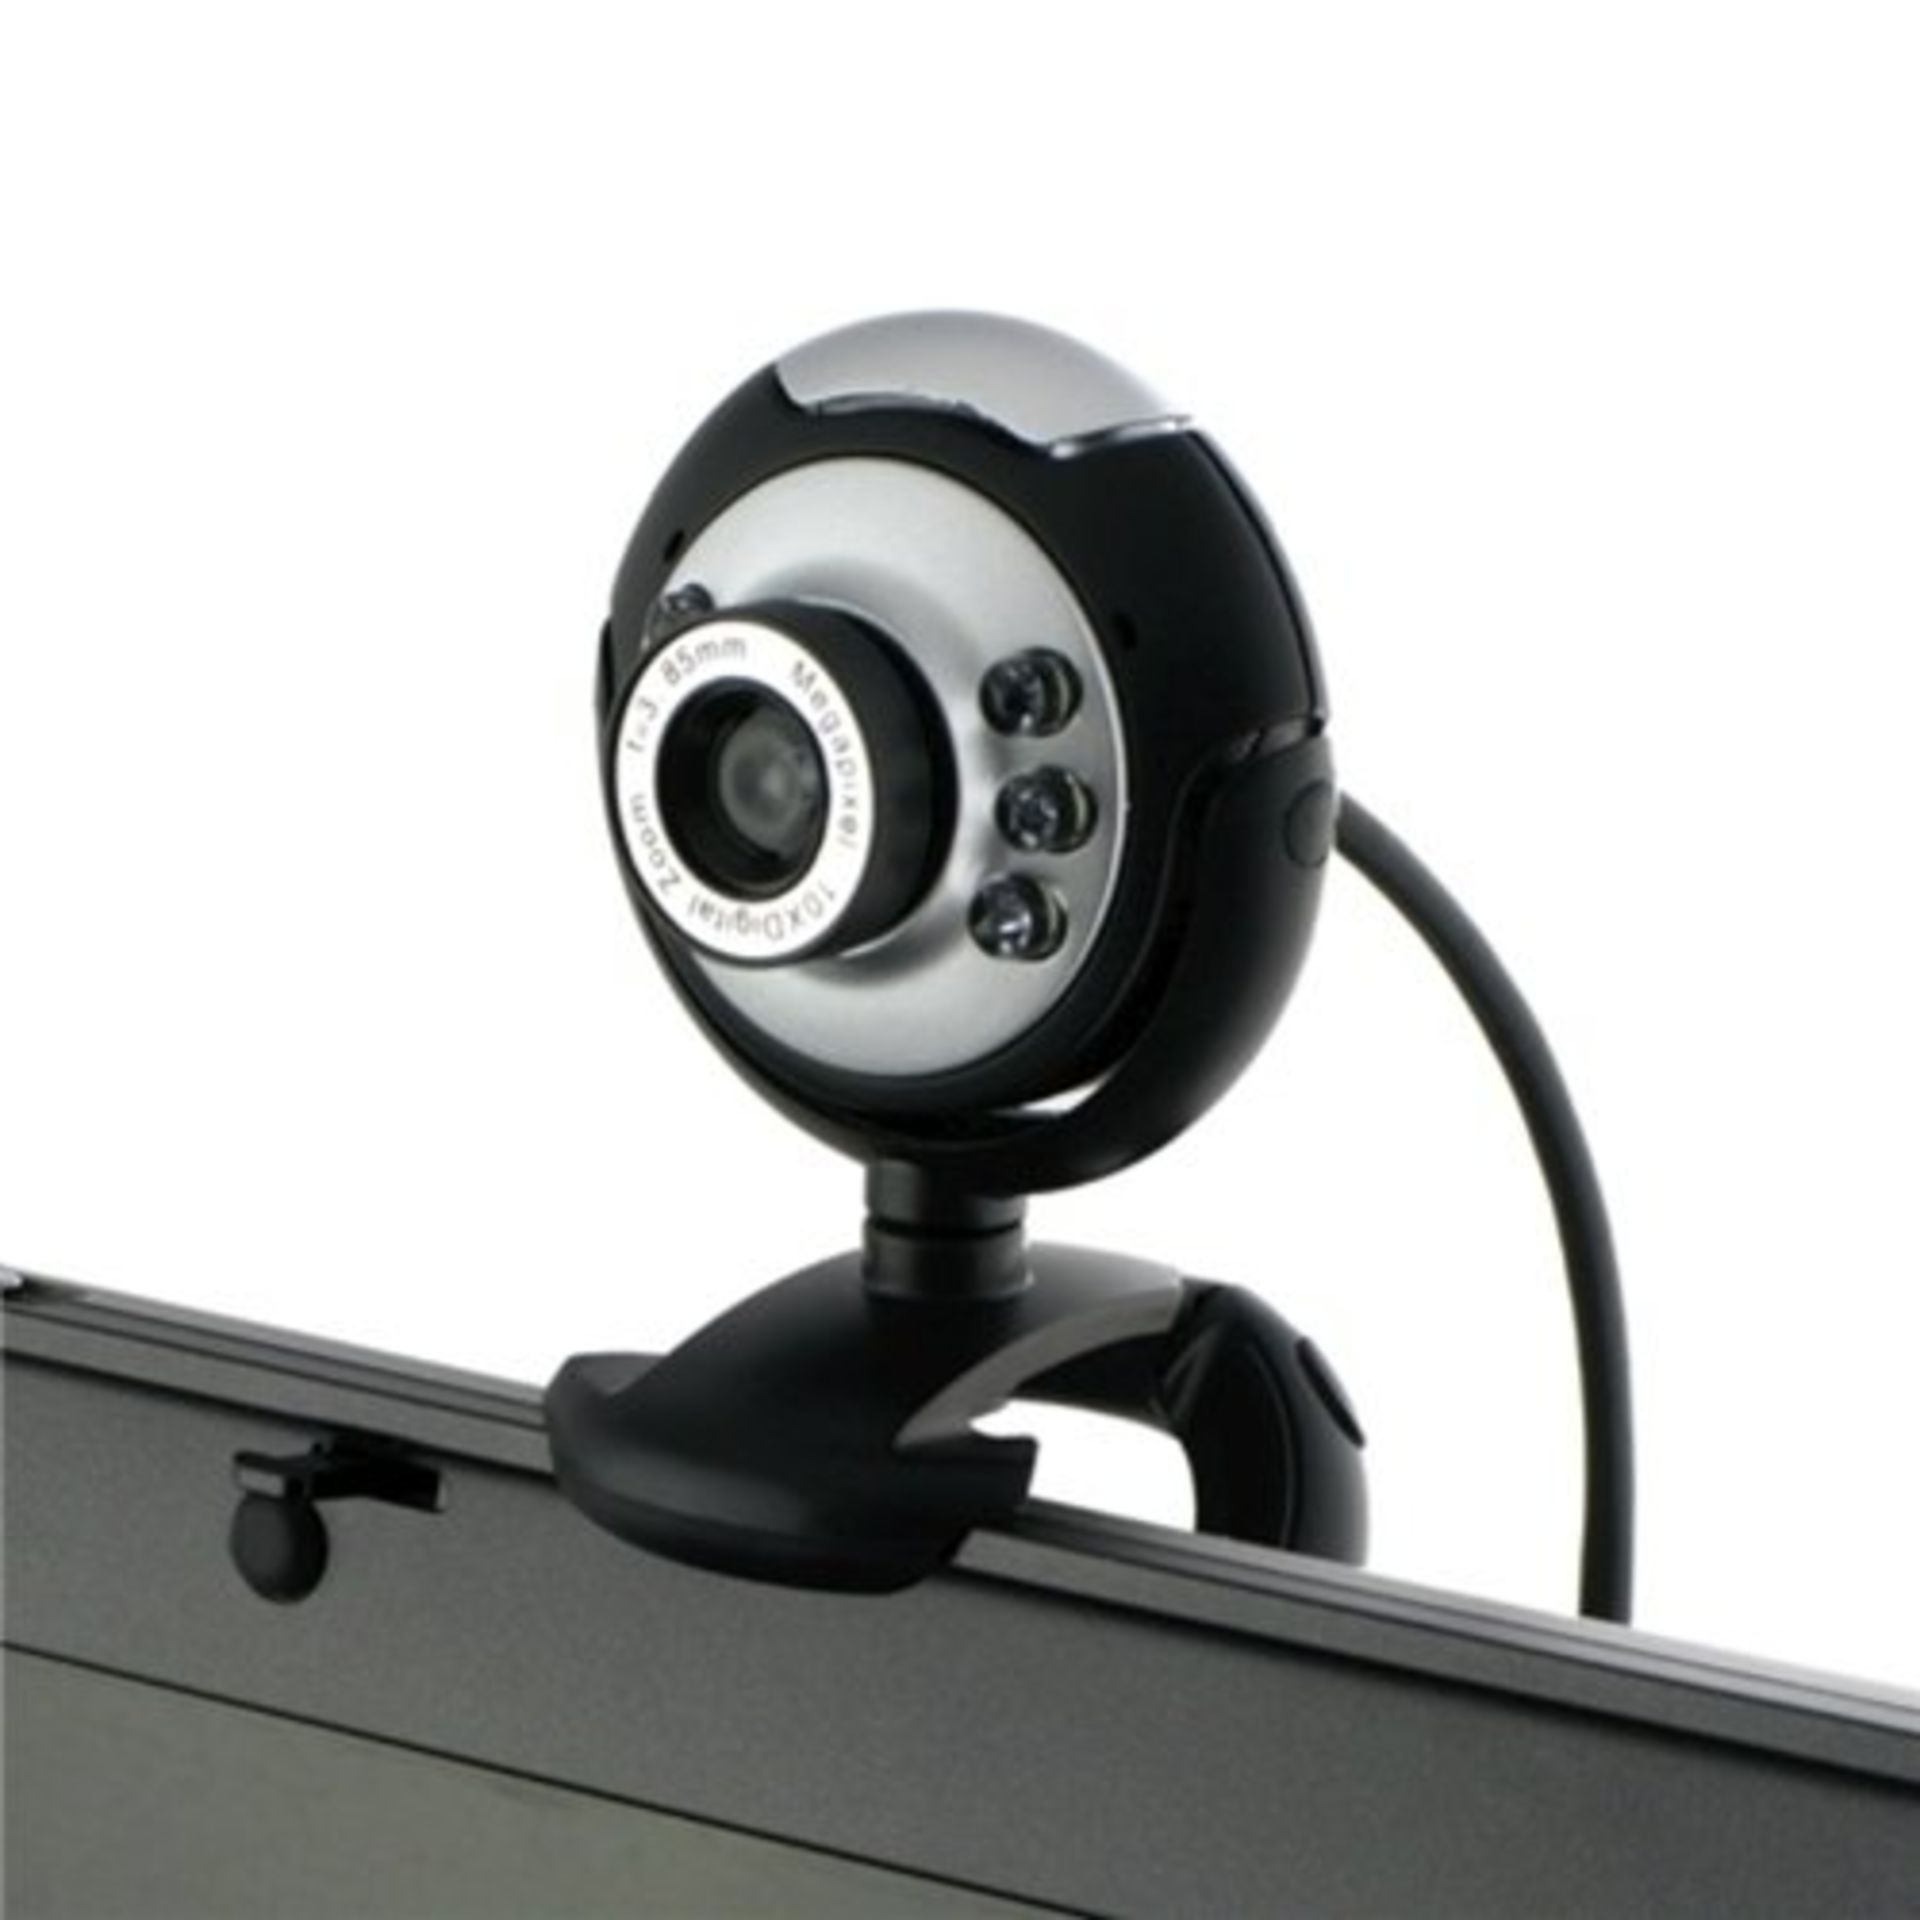 Brand New USB Mini PC Webcam With Built In Microphone - 10x Zoom - 6 Bright LED Lights For Use At